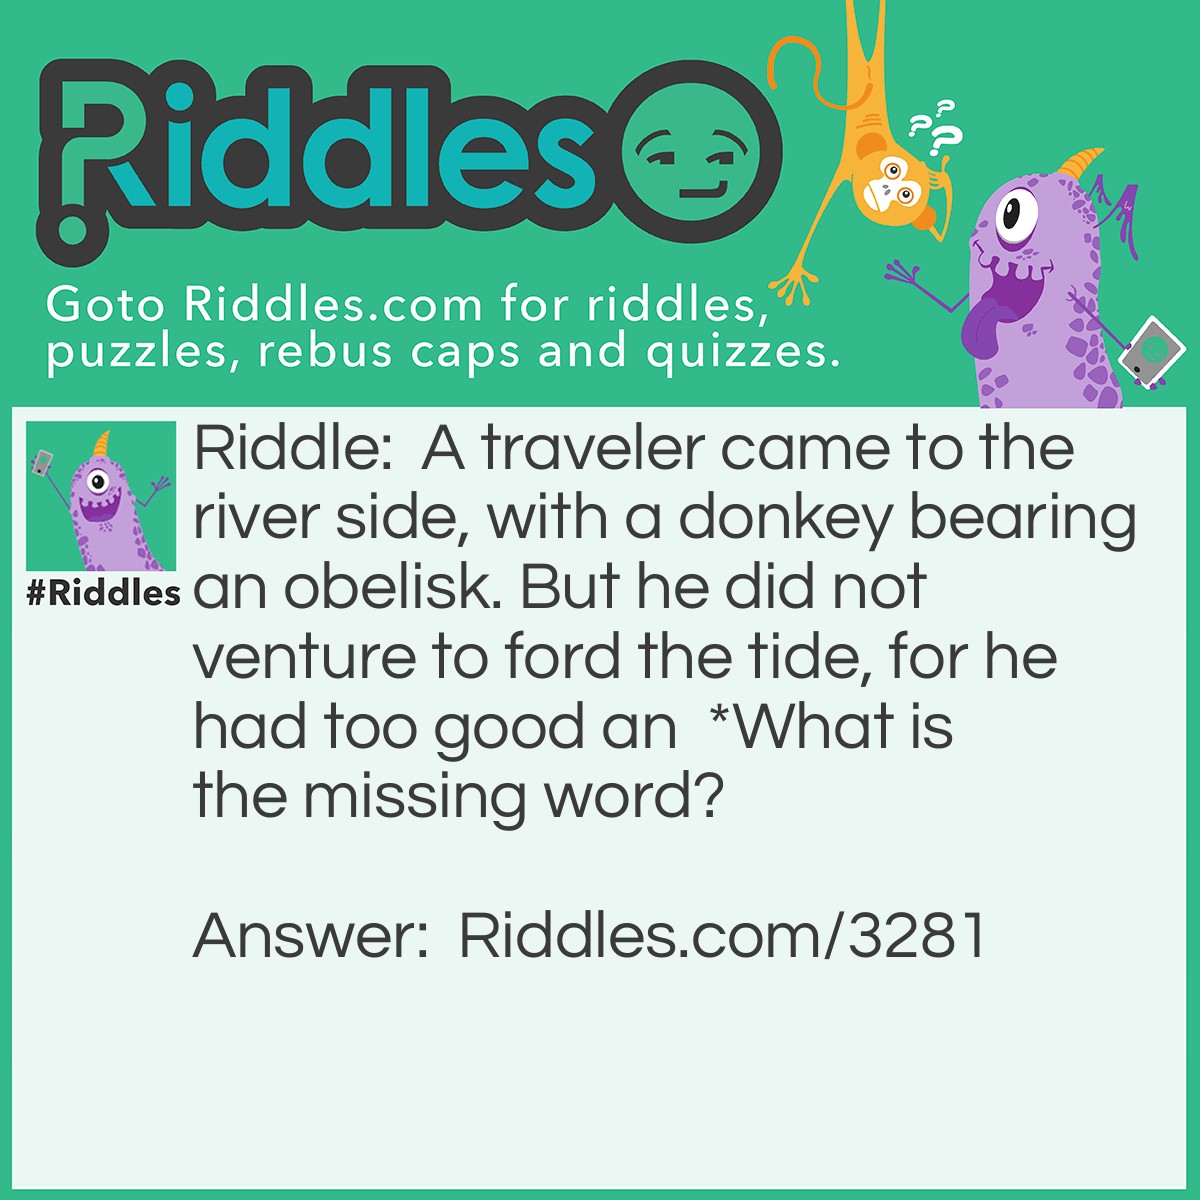 Riddle: A traveler came to the river side, with a donkey bearing an obelisk. But he did not venture to ford the tide, for he had too good an *. 
What is the missing word? Answer: Asterisk = "Ass to Risk".